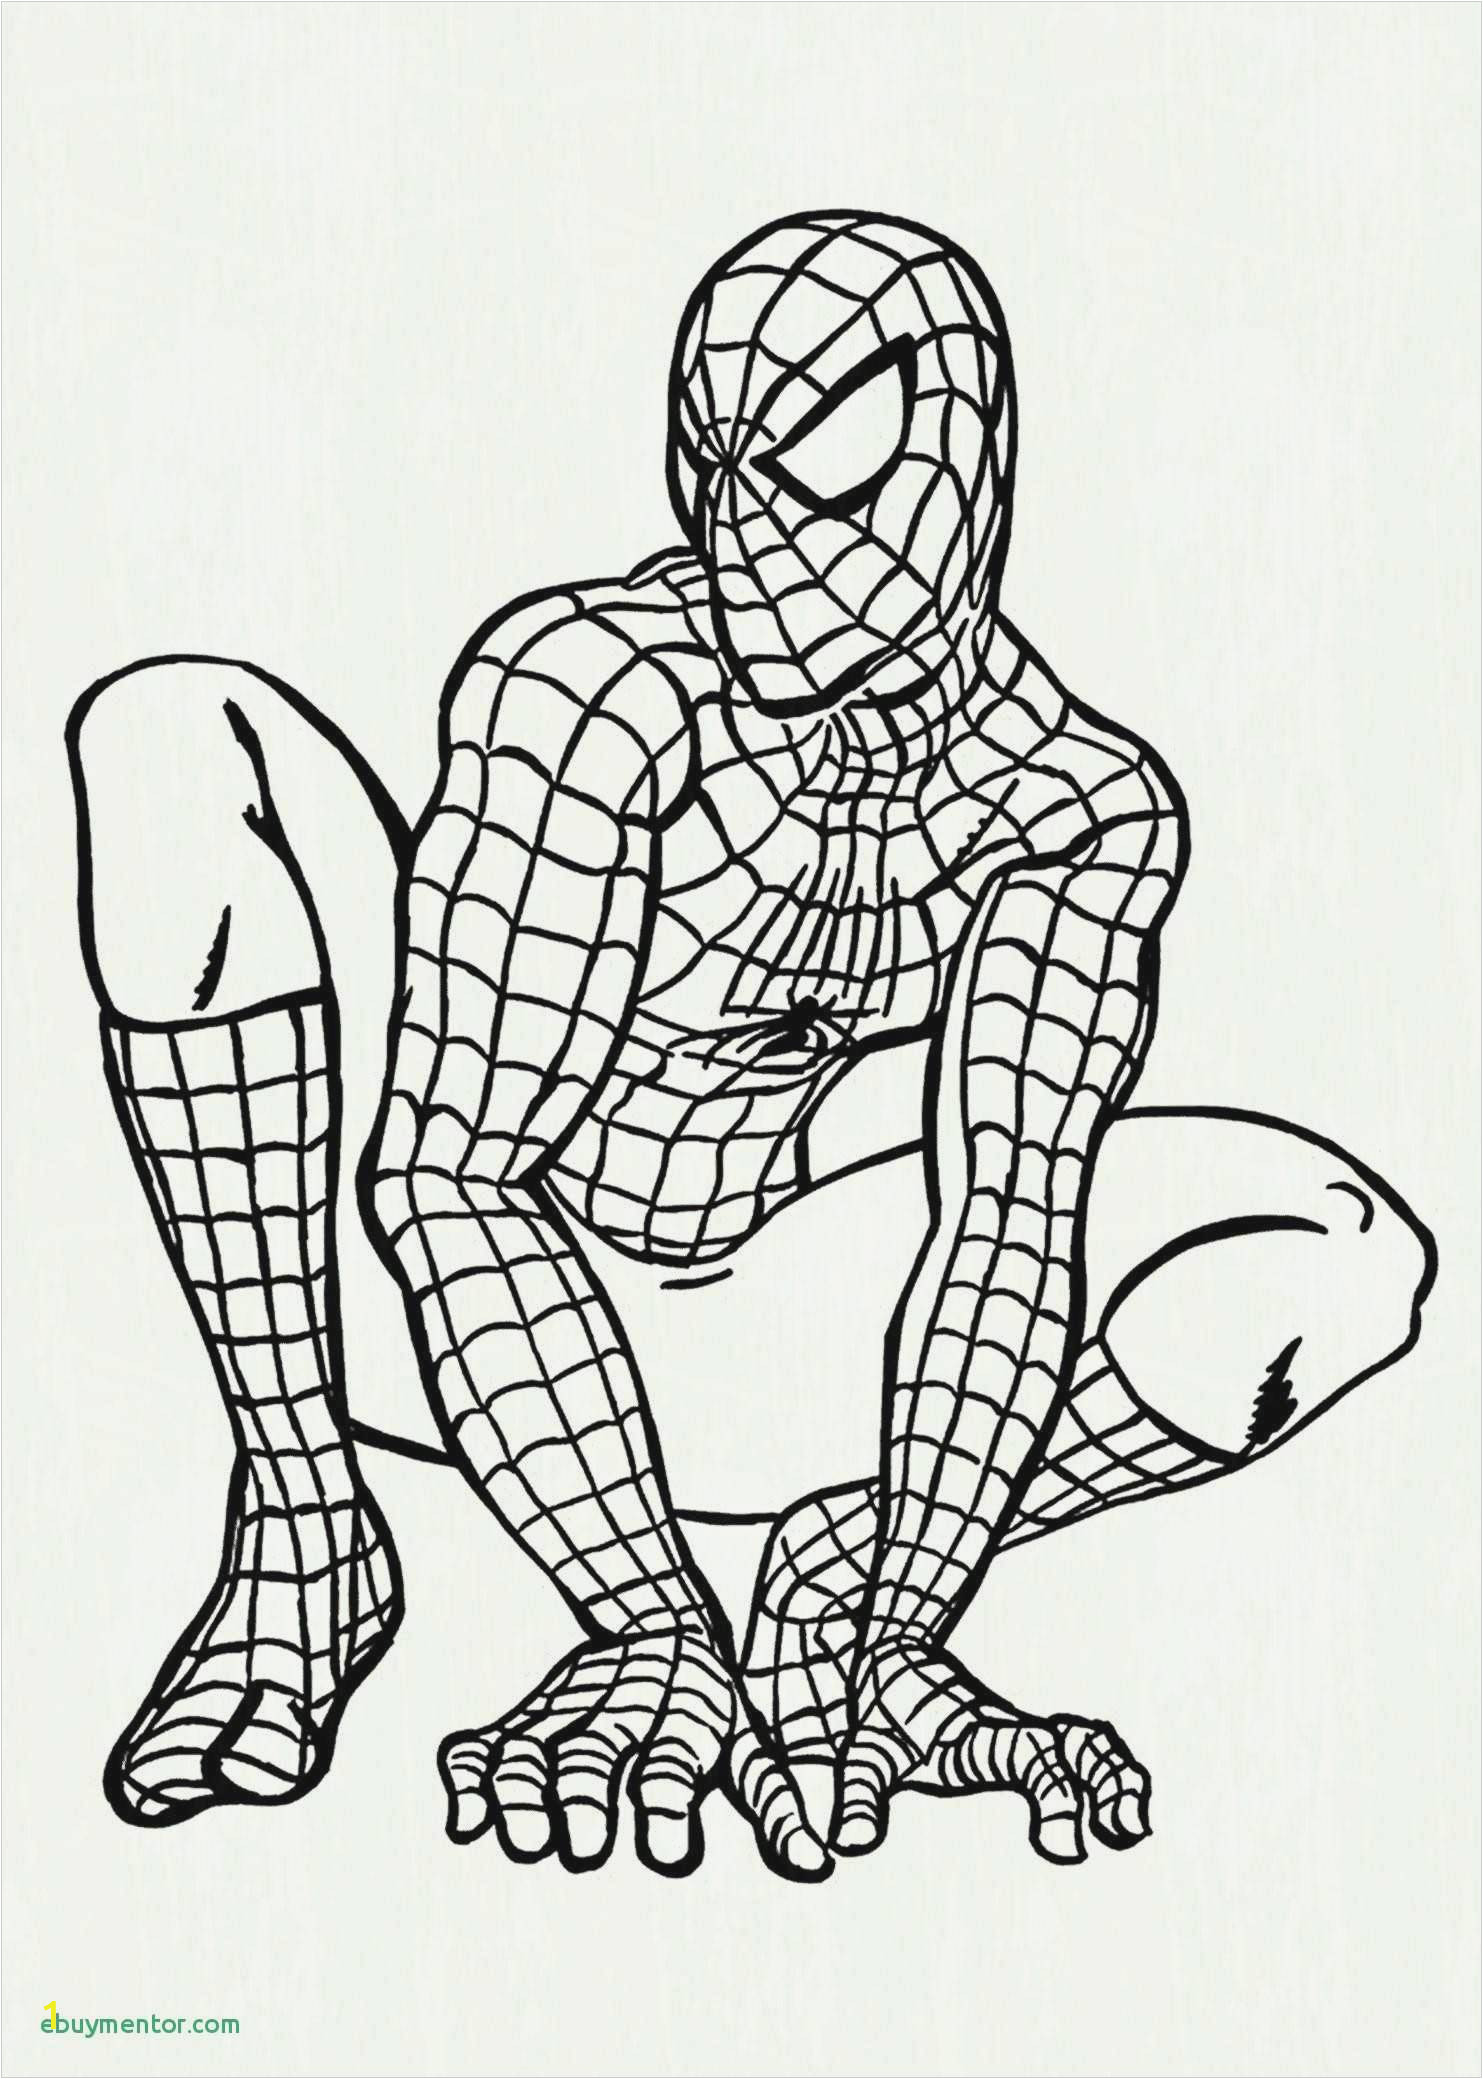 Easy Disney Coloring Pages New Coloring Pages Superhero Printable Fresh 0 0d